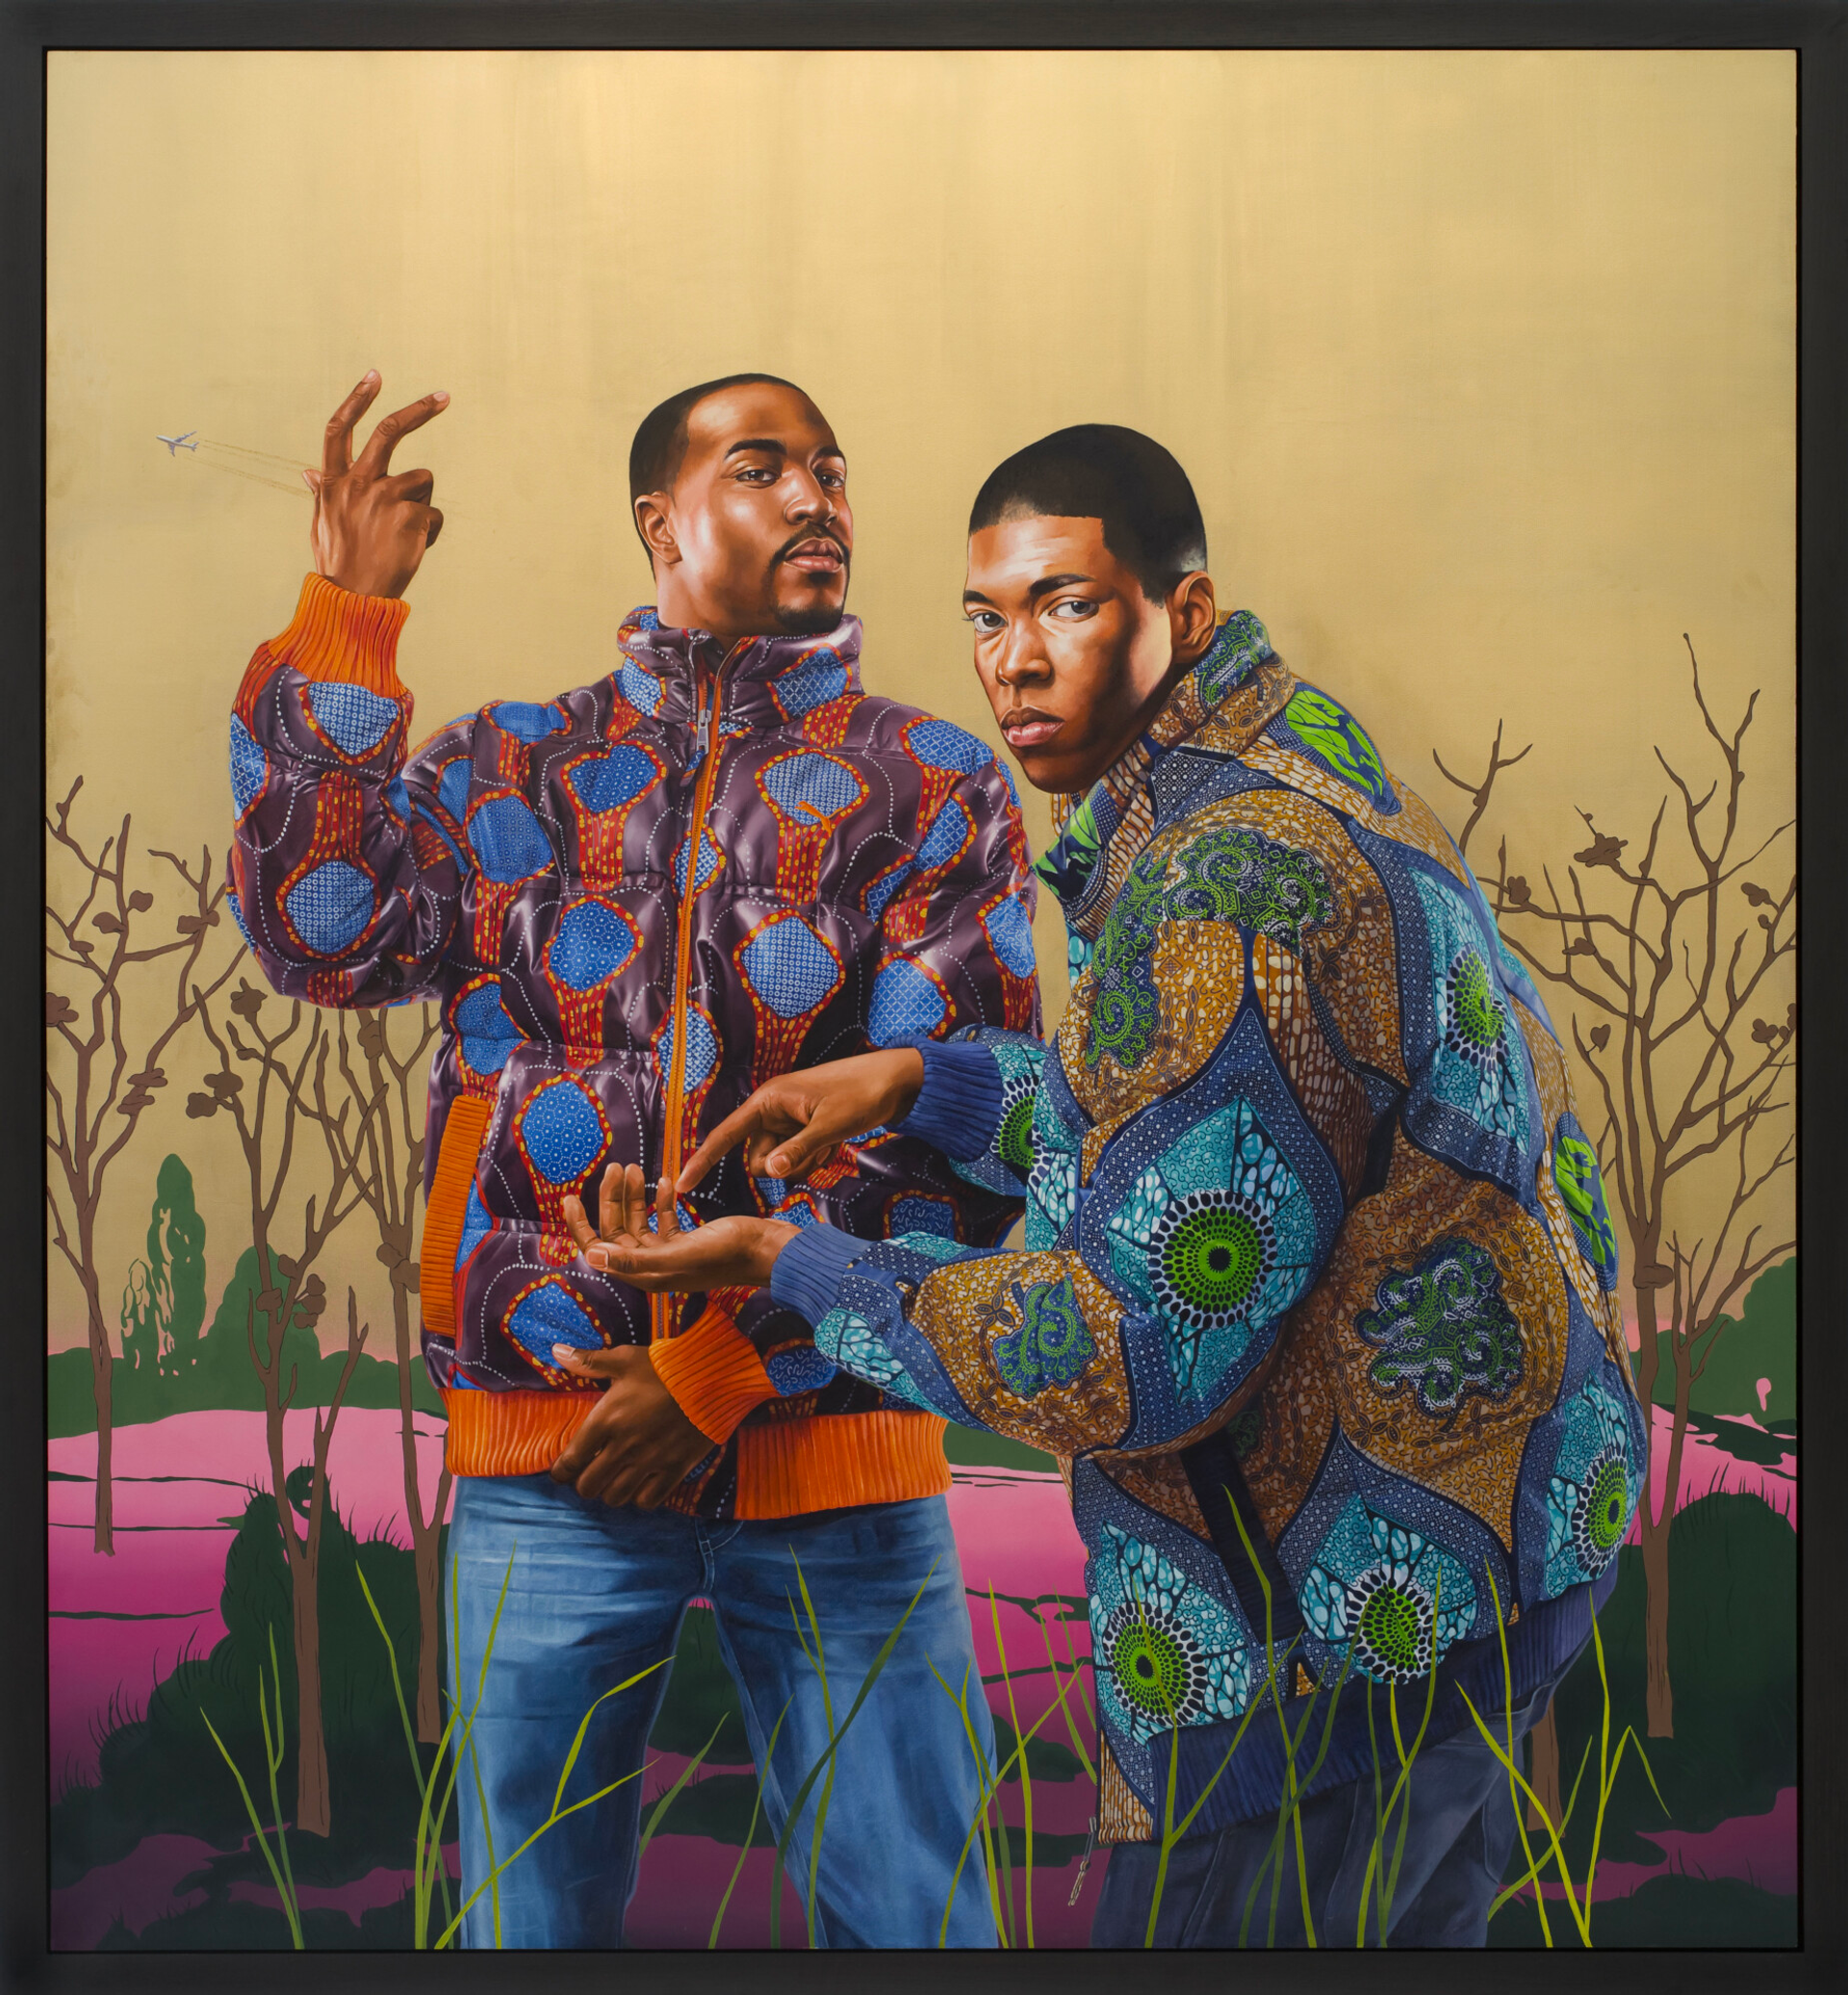 Two black men in jeans and vibrant oriental patterned zip-up jackets. One man poses with his hand near his crotch while the other raises his hand in a performance stance. The second man gestures with one hand and points to his palm with the other, facing the viewer. The scene is set outdoors with a golden sky, a pink path, and lush green bushes.